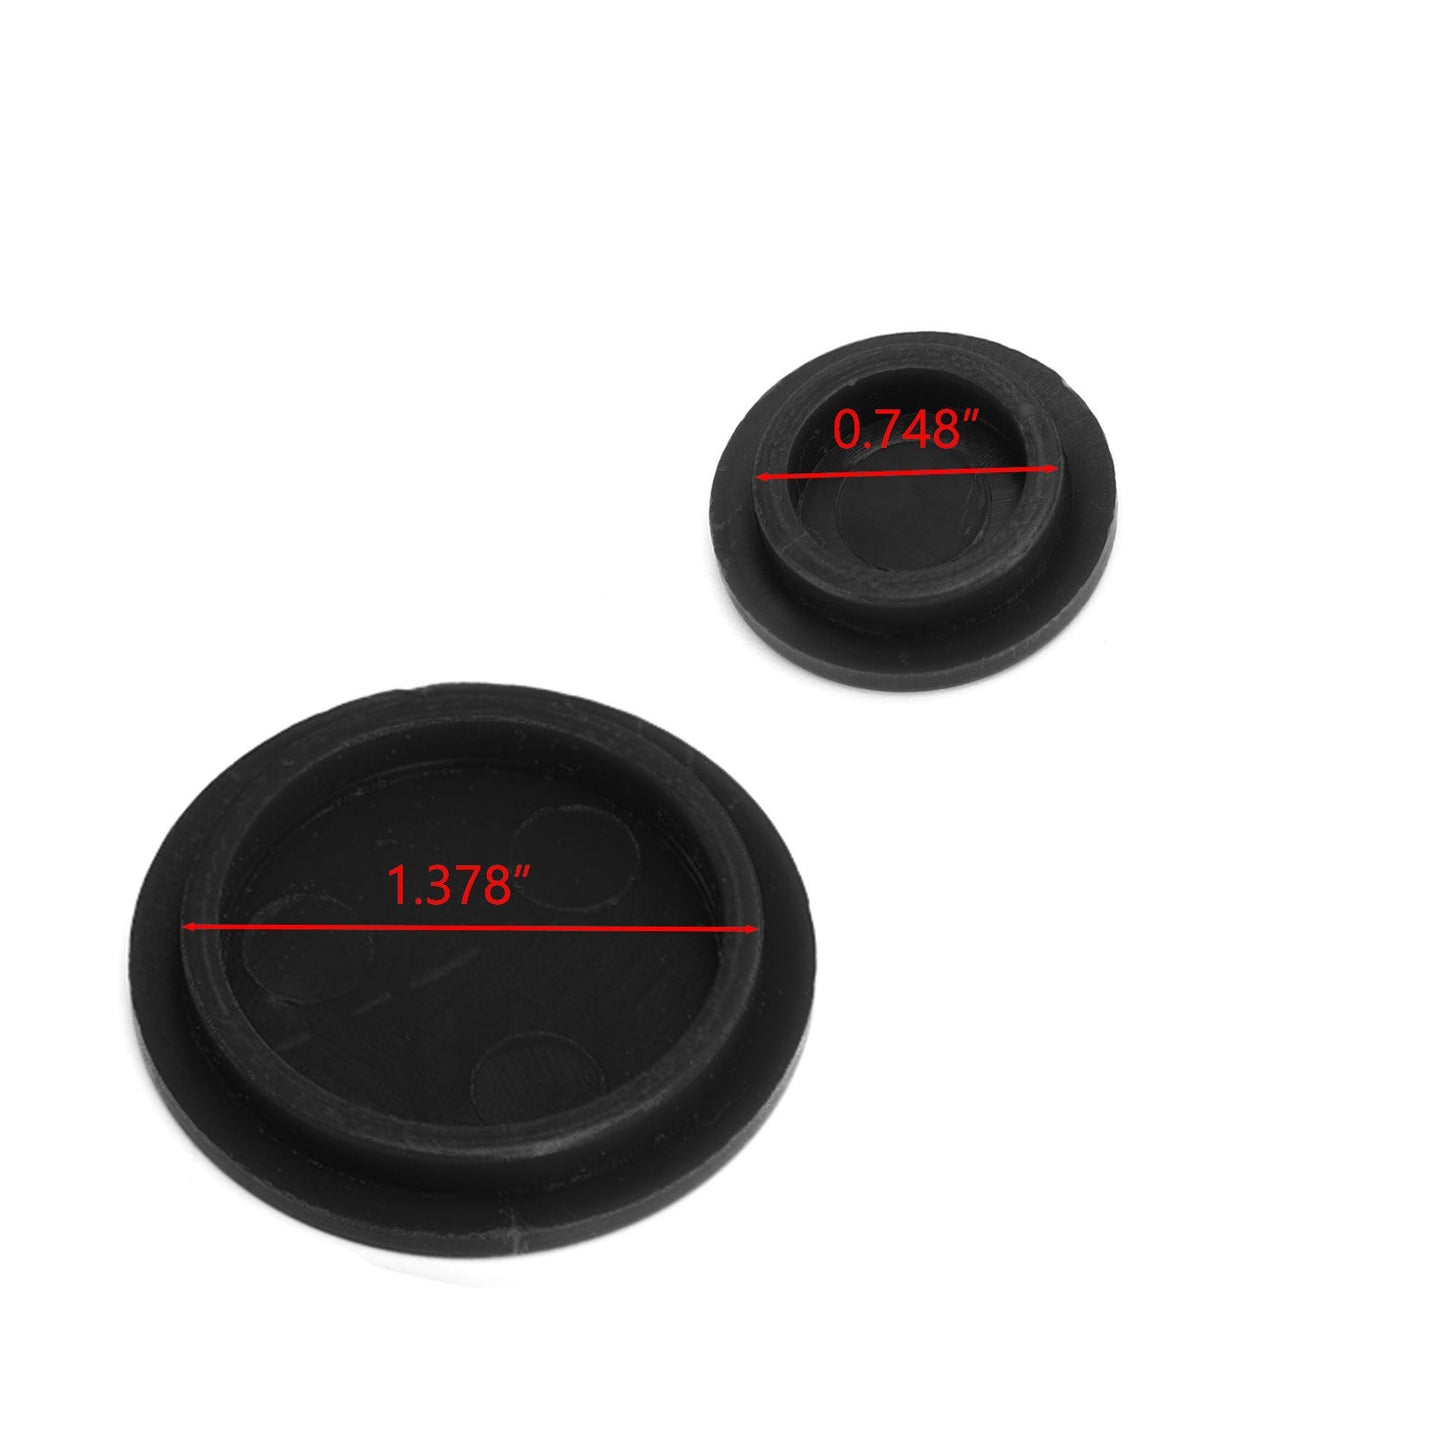 Grease Caps for John Deere 1023E 1025R 2025R Compact Tractor 120 Loader Black,Black Grease Caps For John Deere 1023E 1025R 2025R Compact Tractor 120 Loader,Compact Tractor 120 Loader Fitting Grease Caps For John Deere 1023E 1025R Black